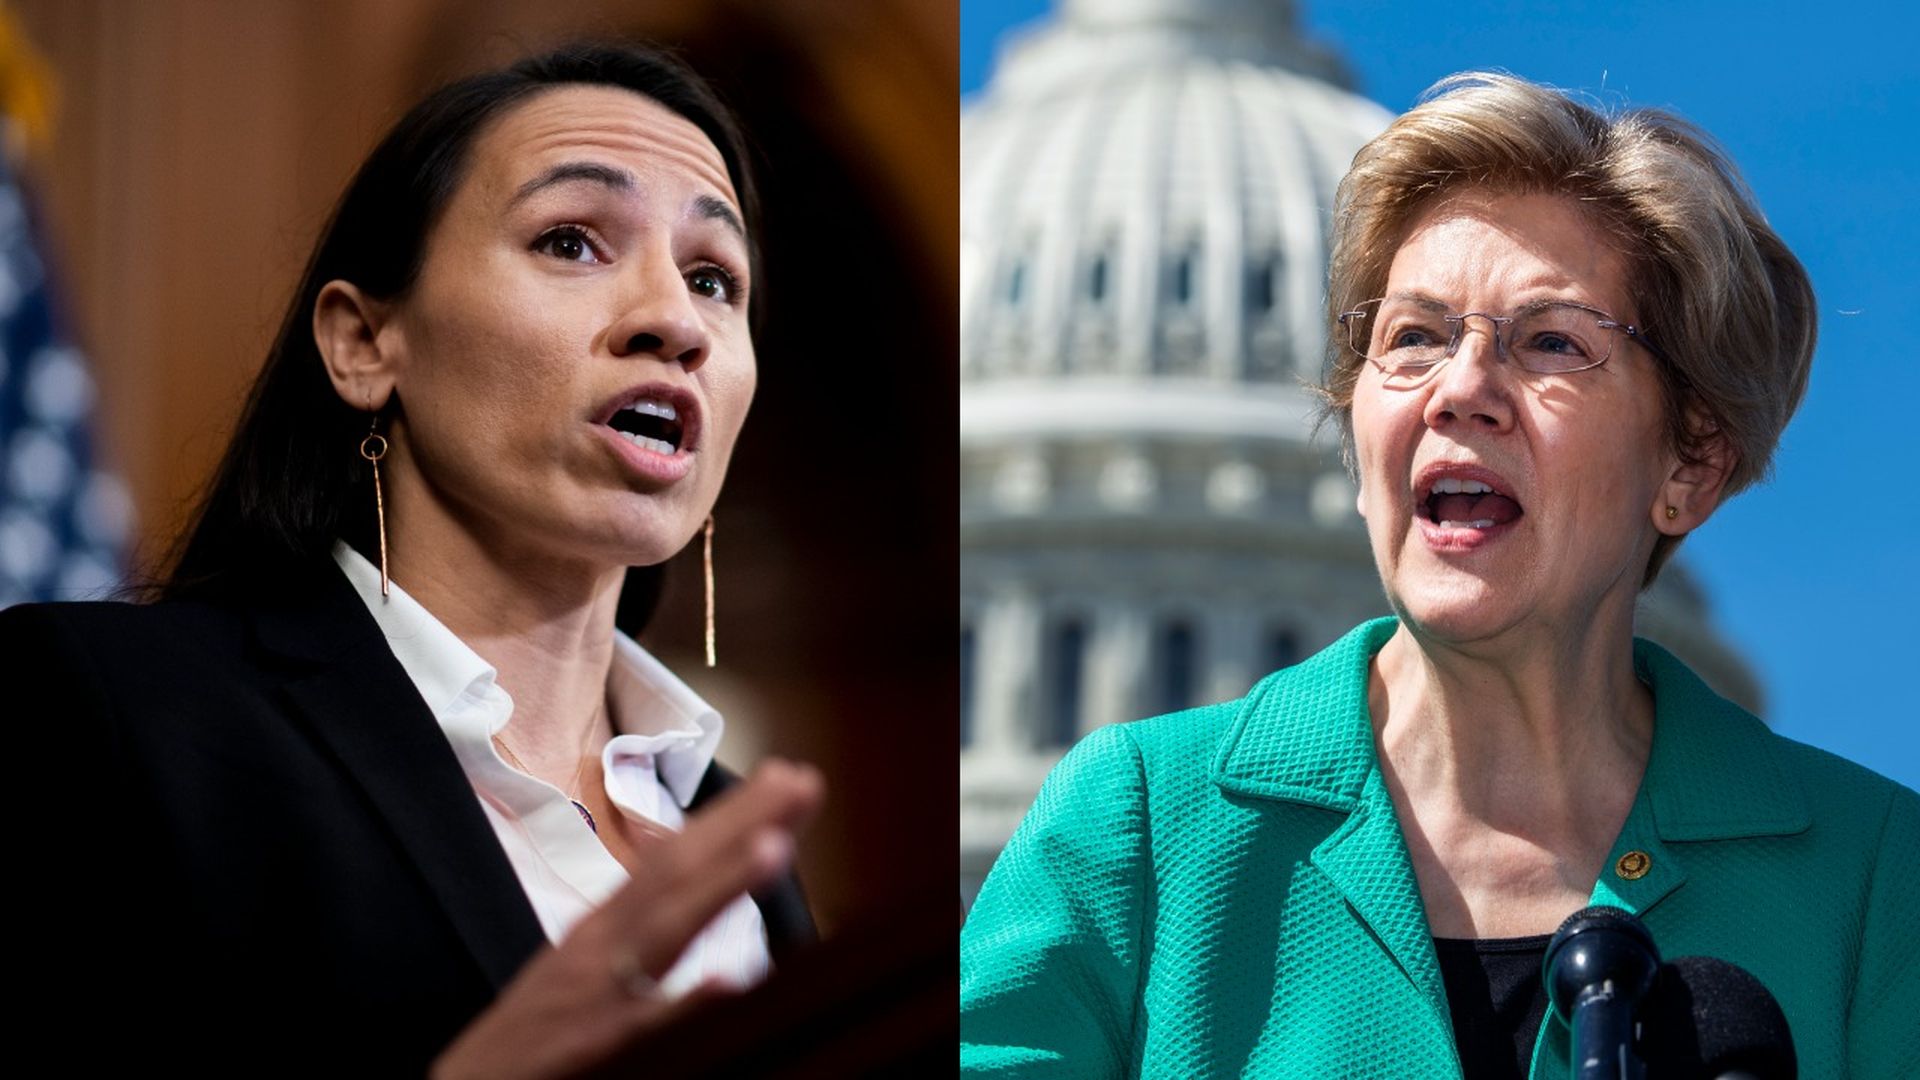 Photo of Sharice Davids speaking on the left and Elizabeth Warren speaking on the right